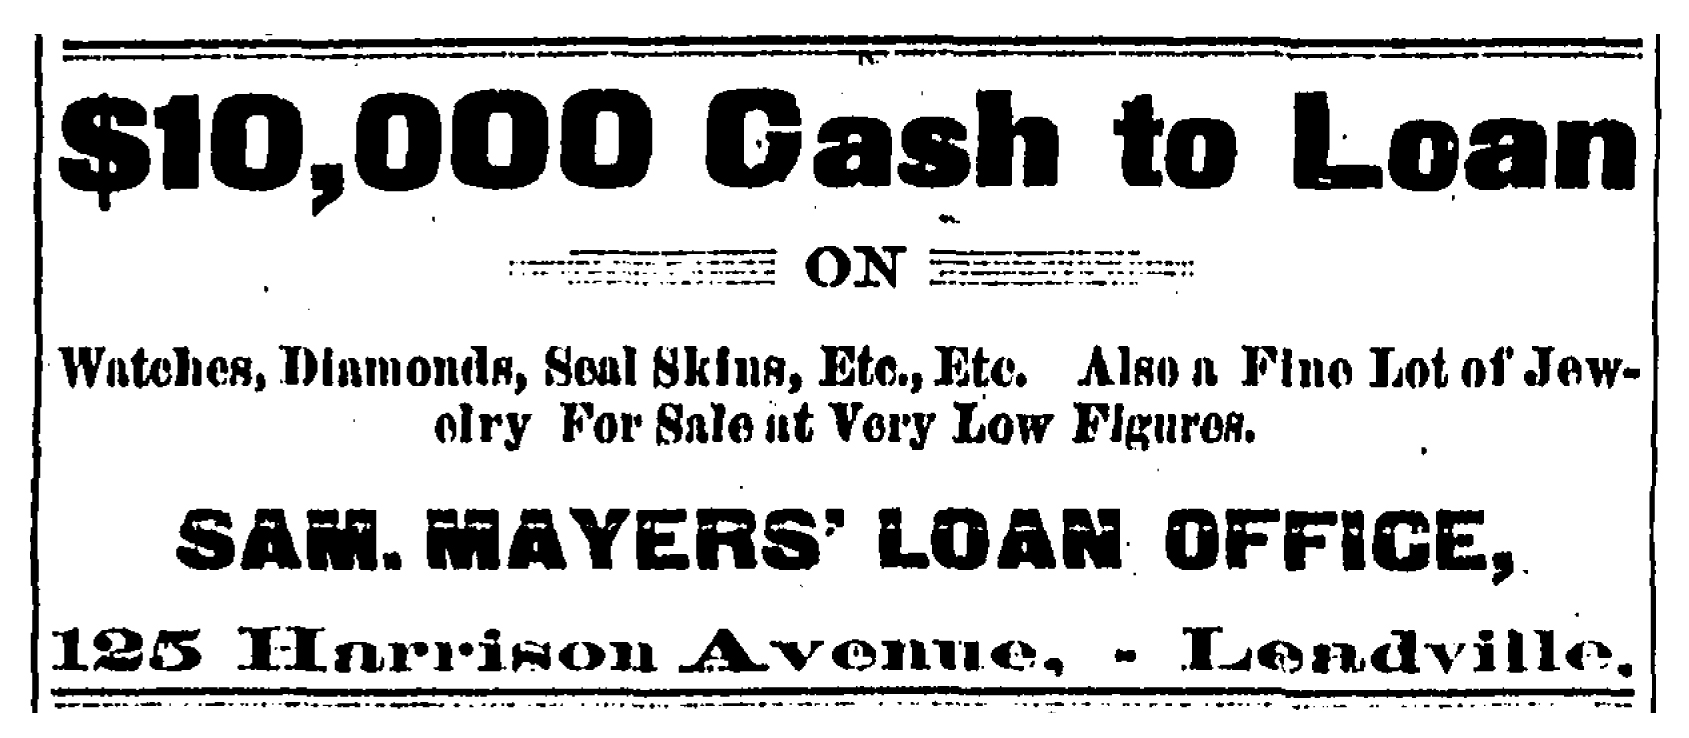 Leadville Daily Herald, March 8, 1883